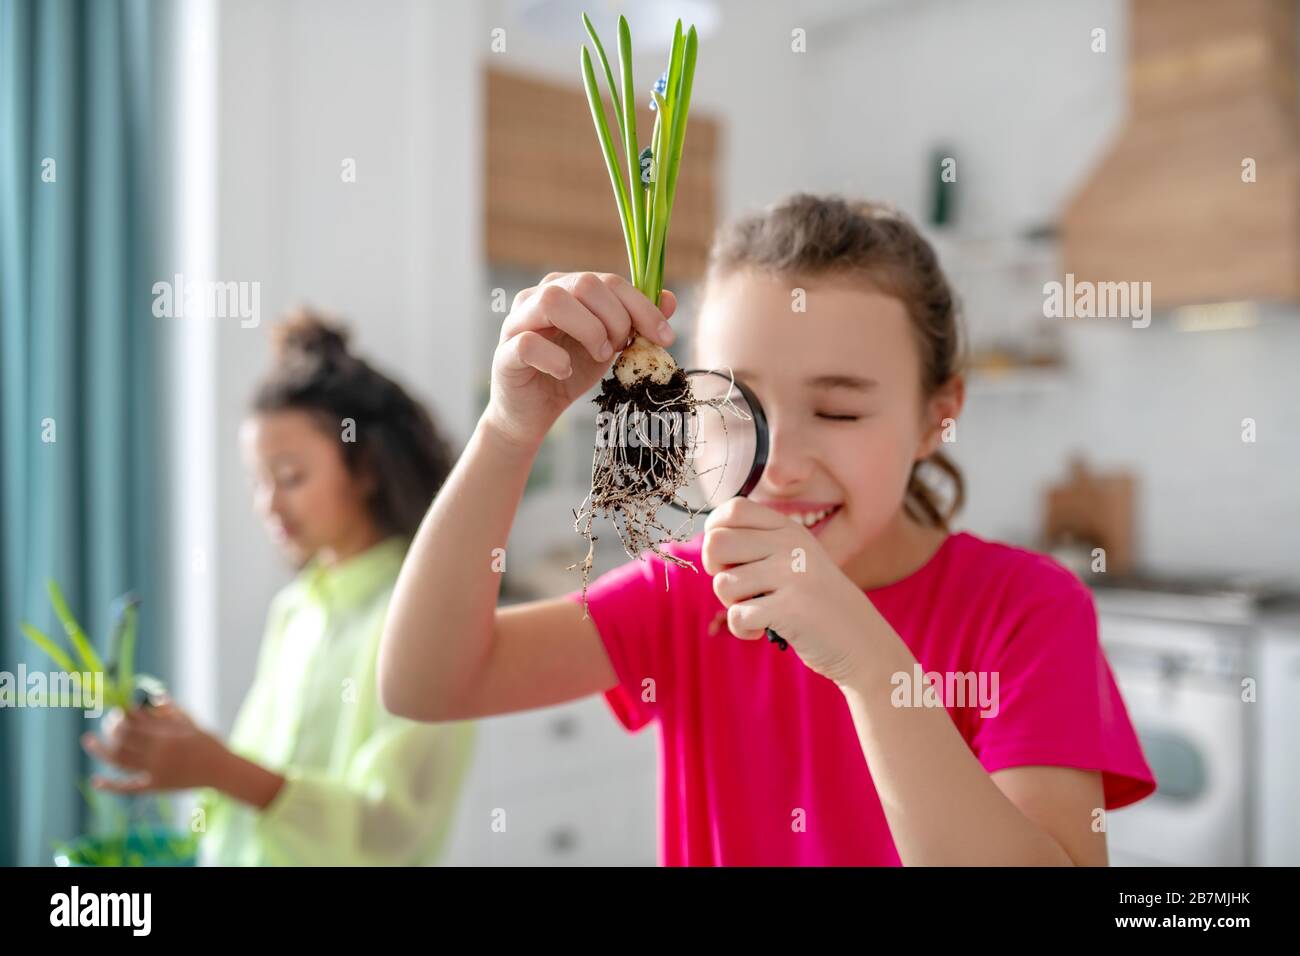 Girl with a plant and a magnifying glass. Stock Photo